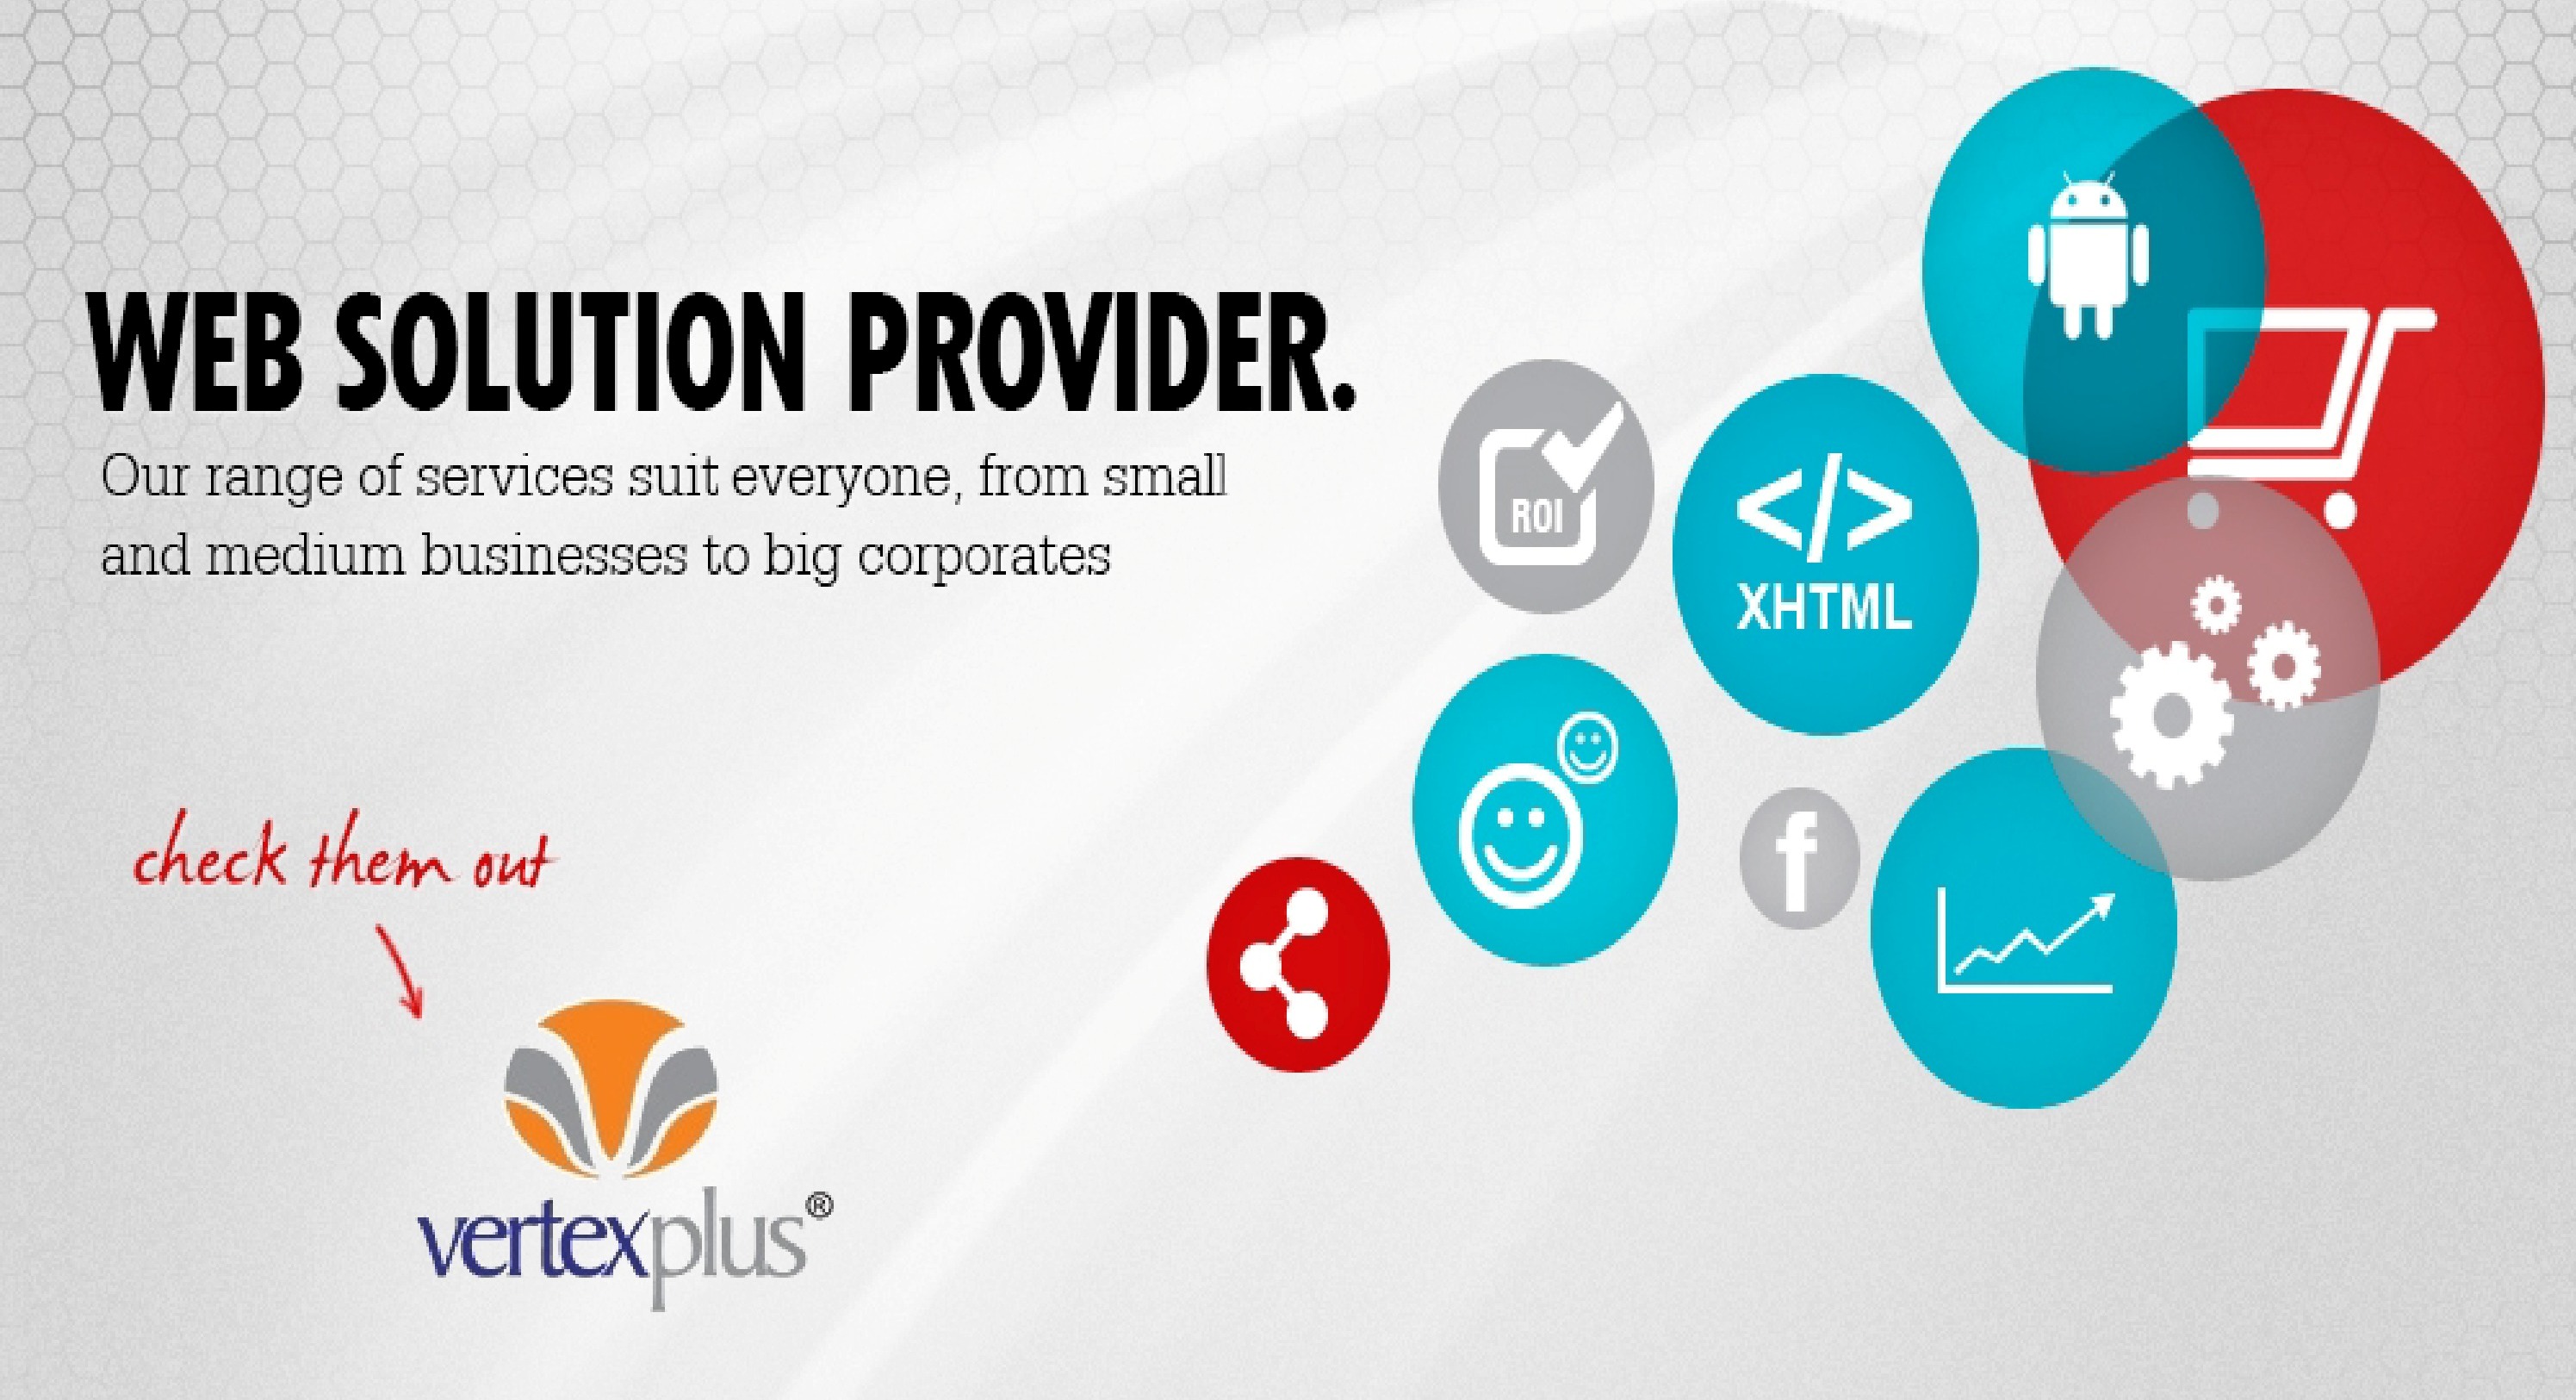 web solutions services at VertexPlus.jpg Web Solution Services Providers in India. Get contact details and address of Web Solution Services firms and companies. For more  details visit http://www.vertexplus.com/website-management.
 by vertexplus